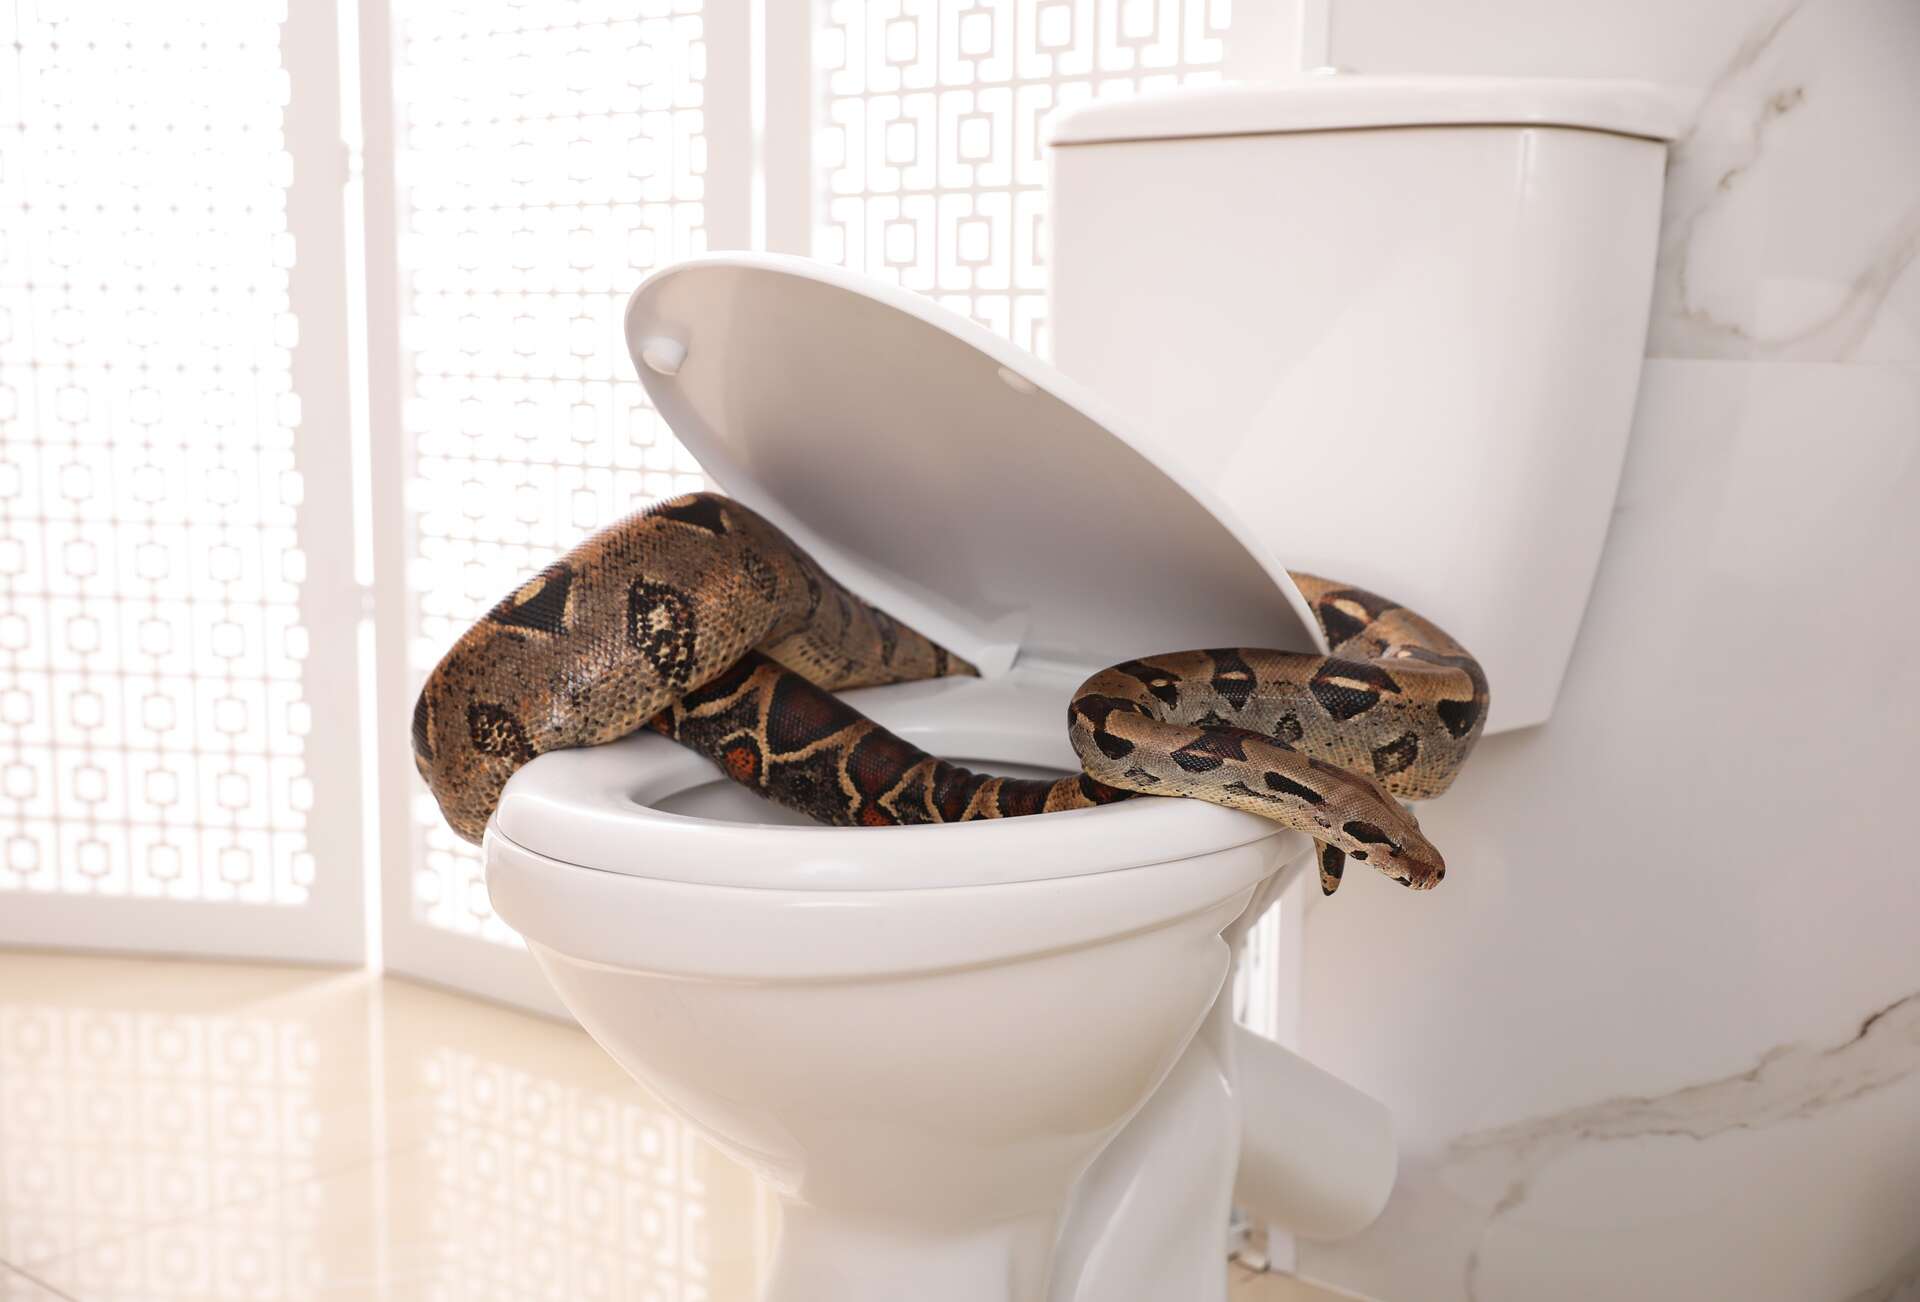 A vacationer is bitten by a venomous snake while going to the toilet